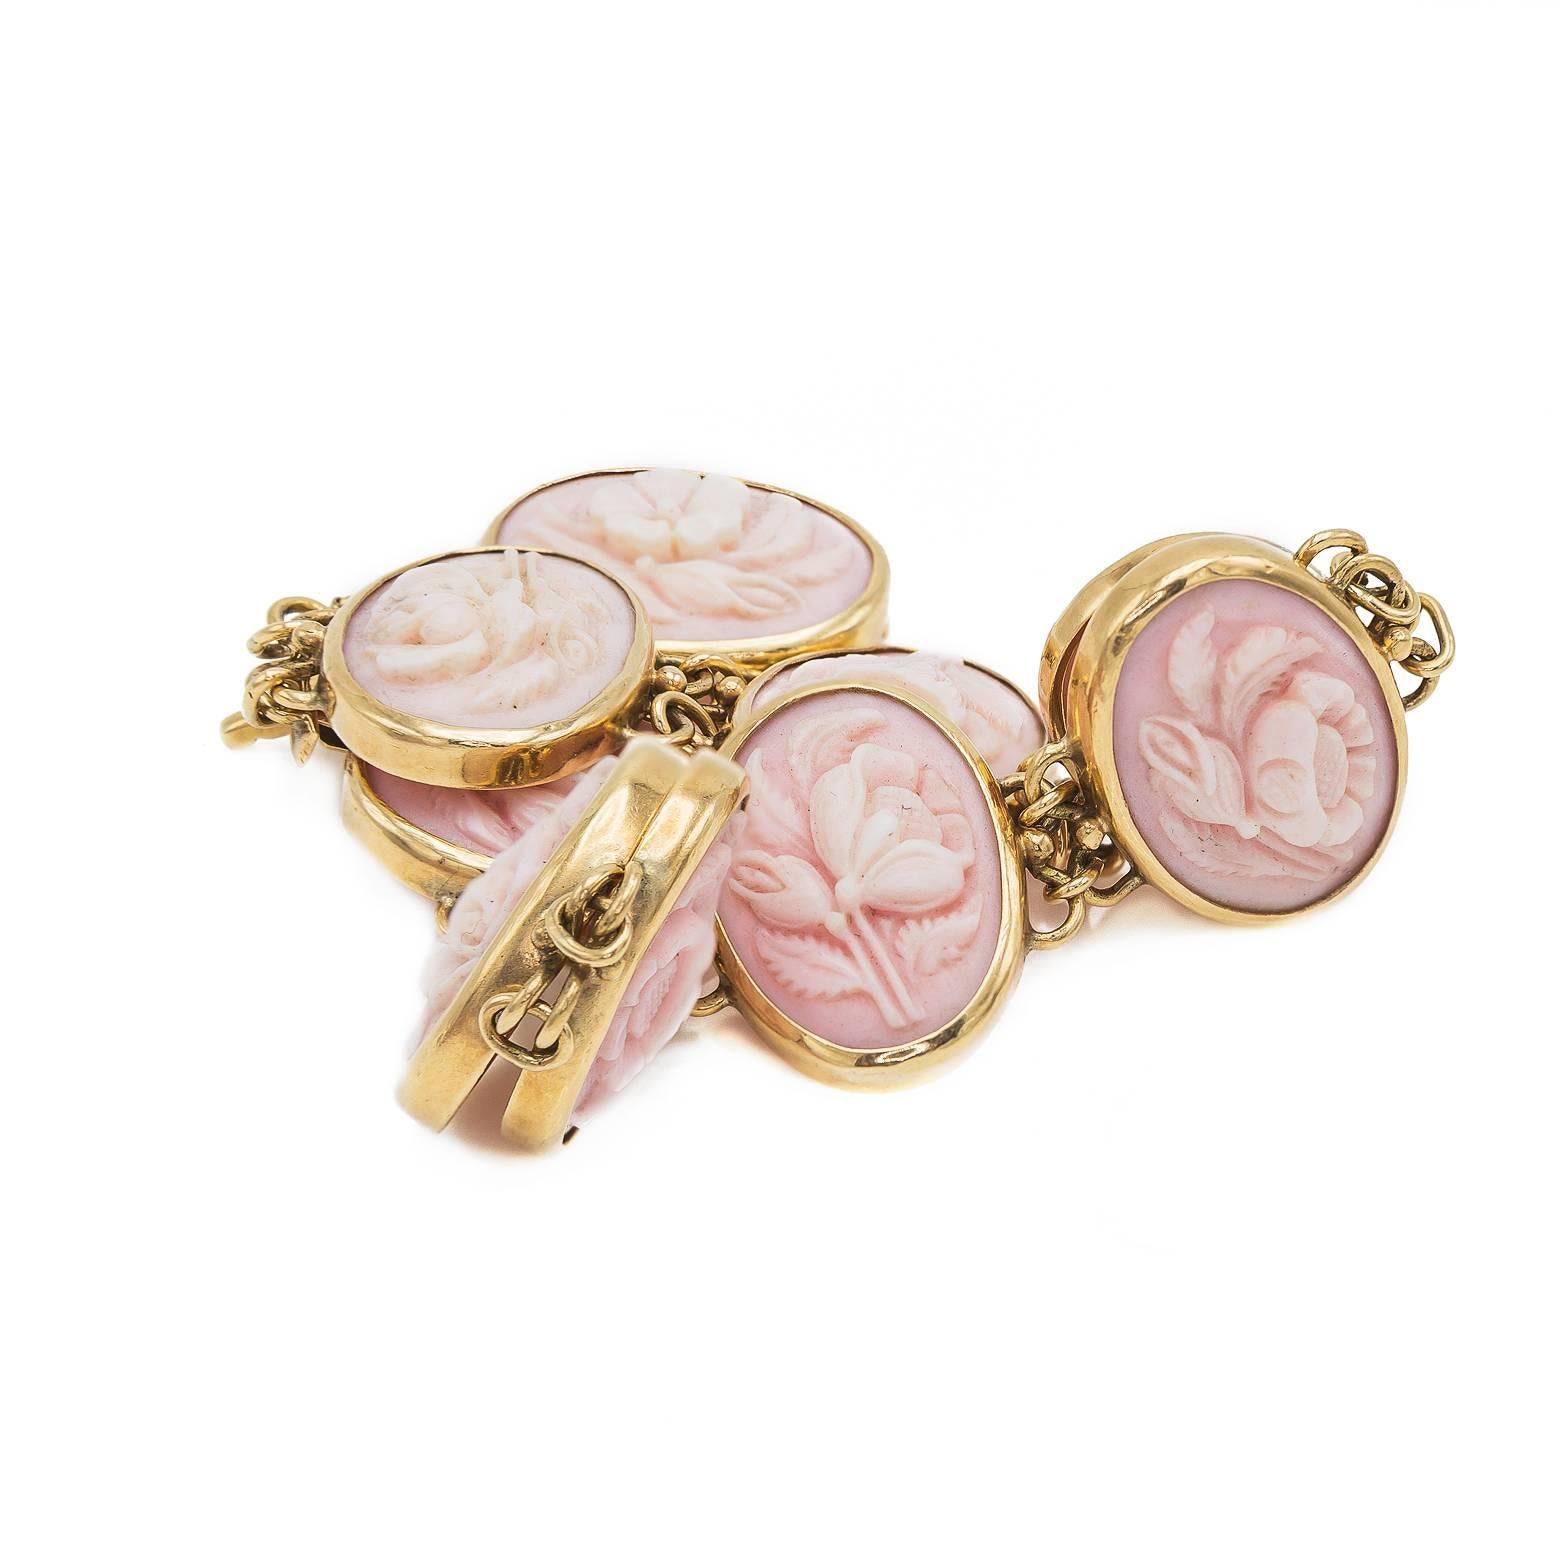 Women's Conch Shell Cameo Bracelet with Engraved Flowers in 14K Yellow Gold